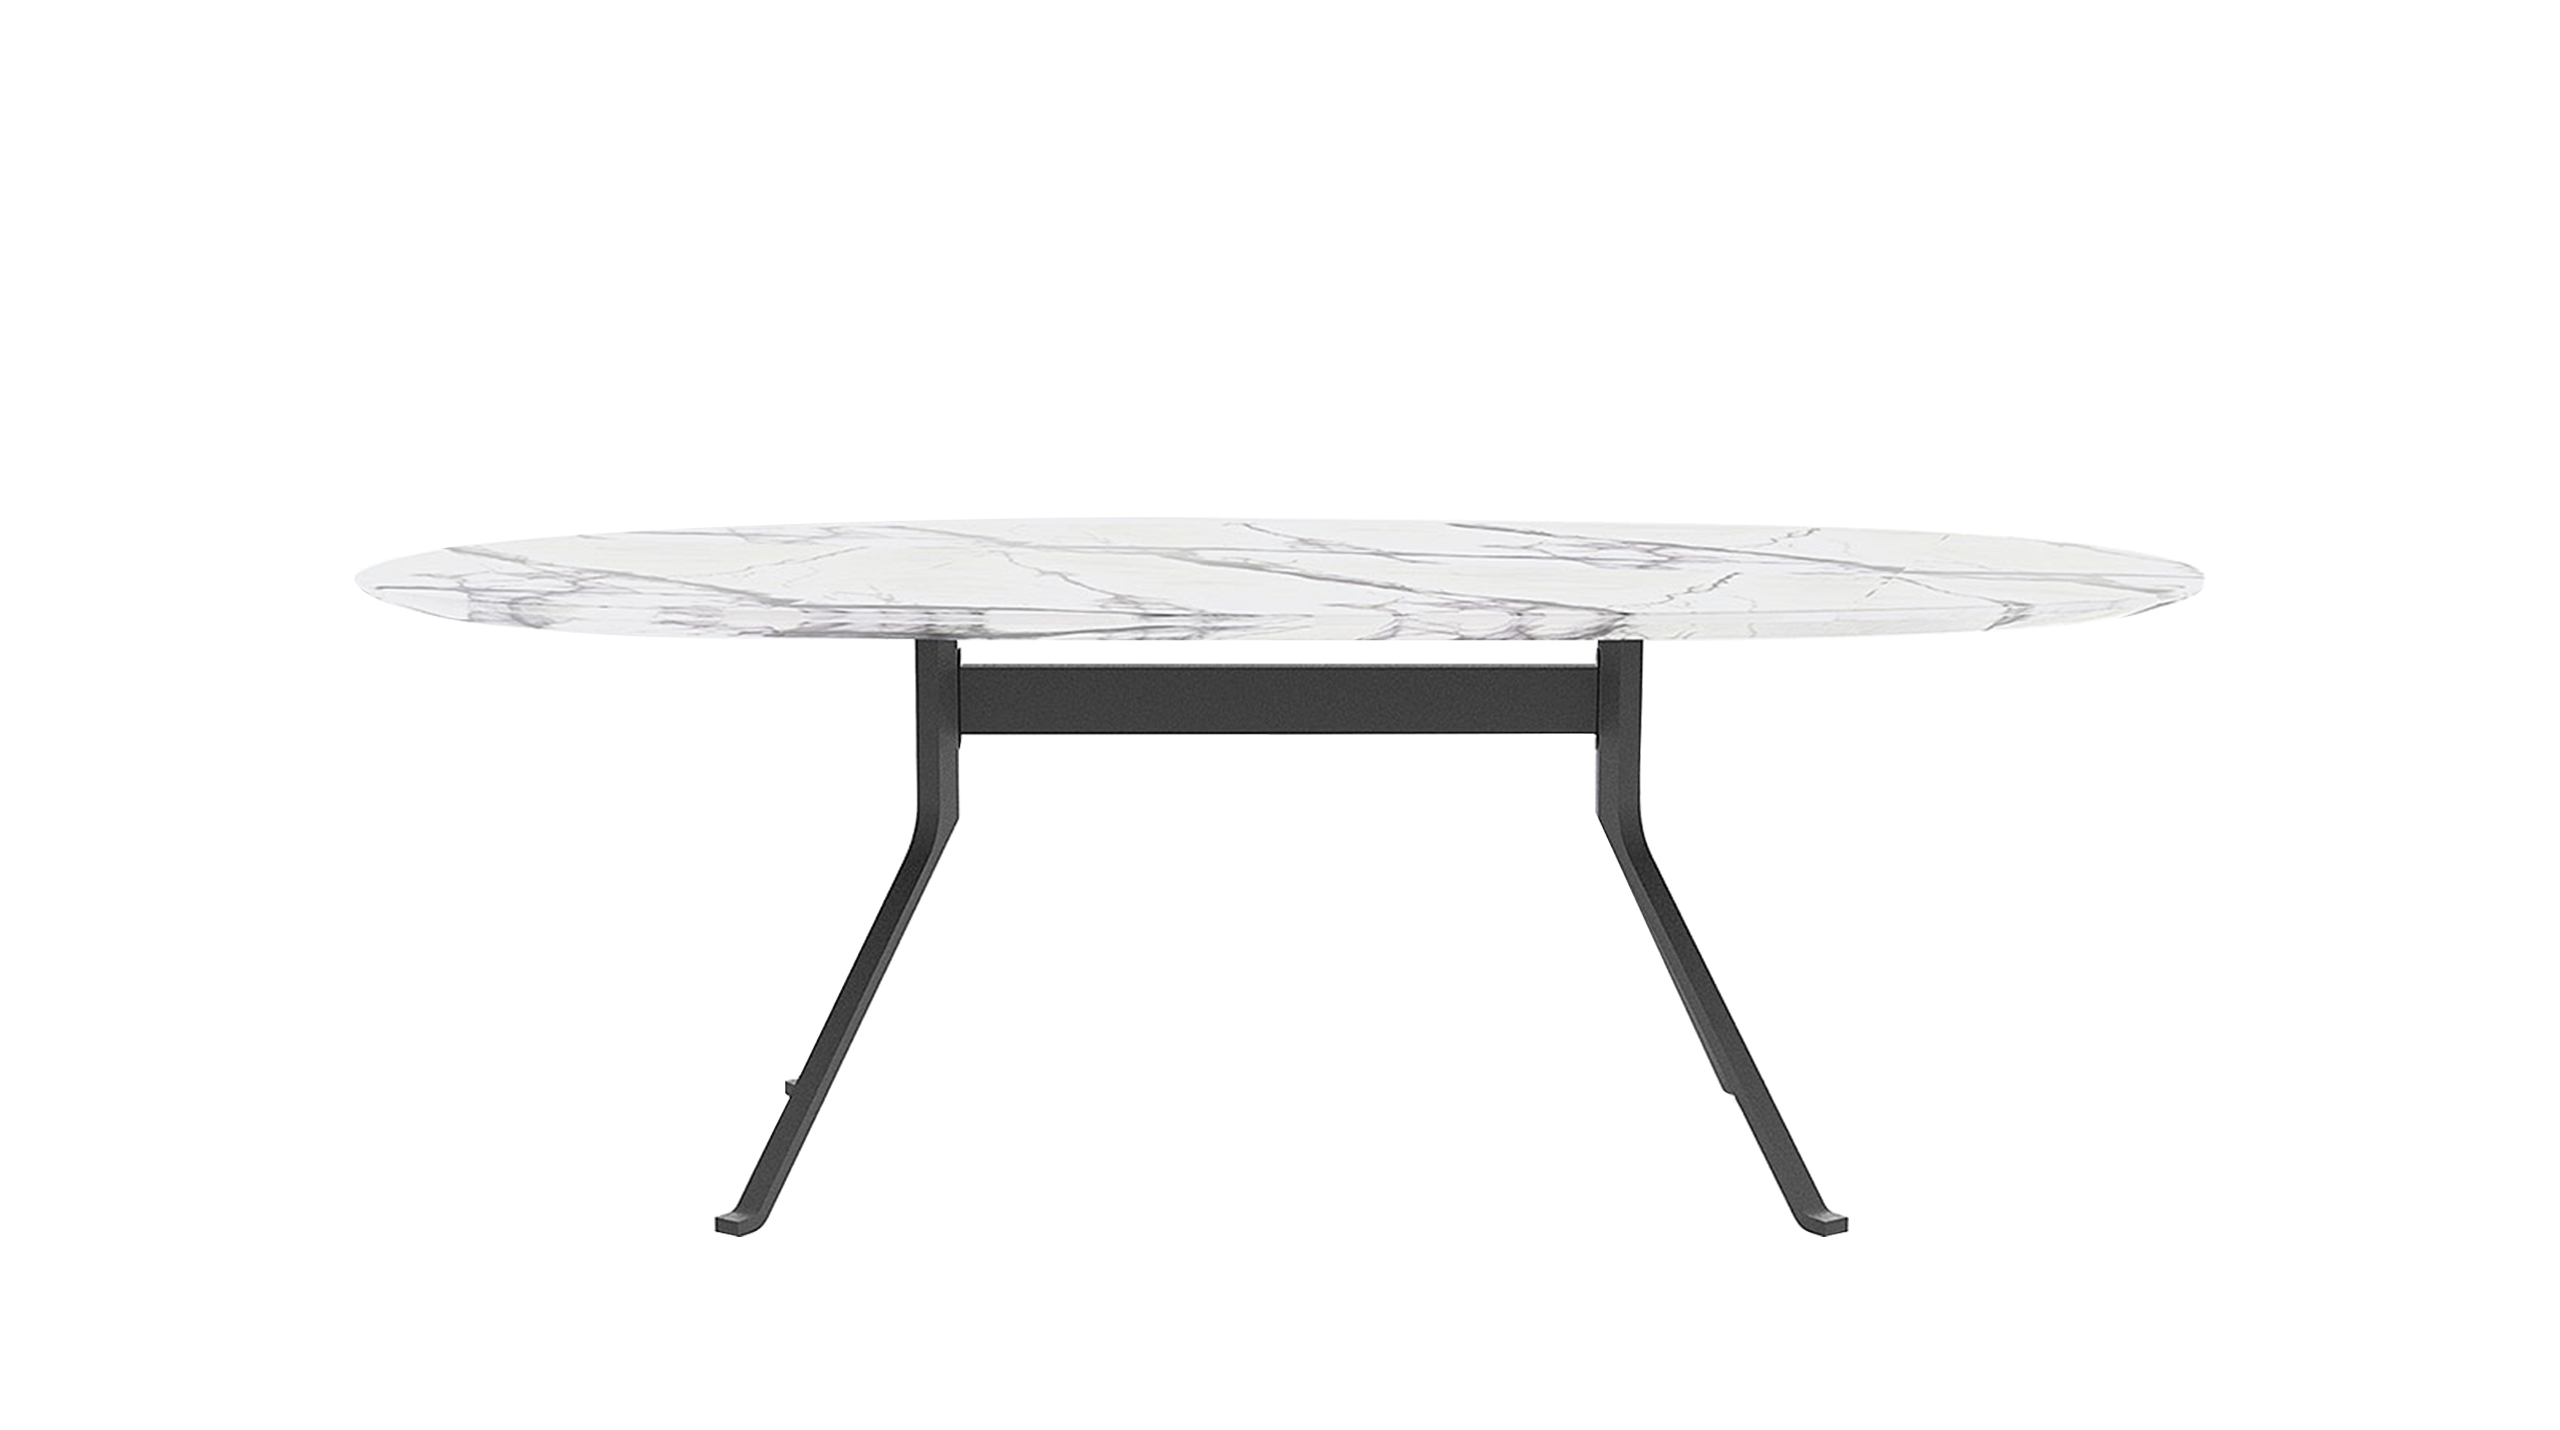 Blink Oval Dining Table – Stone Top